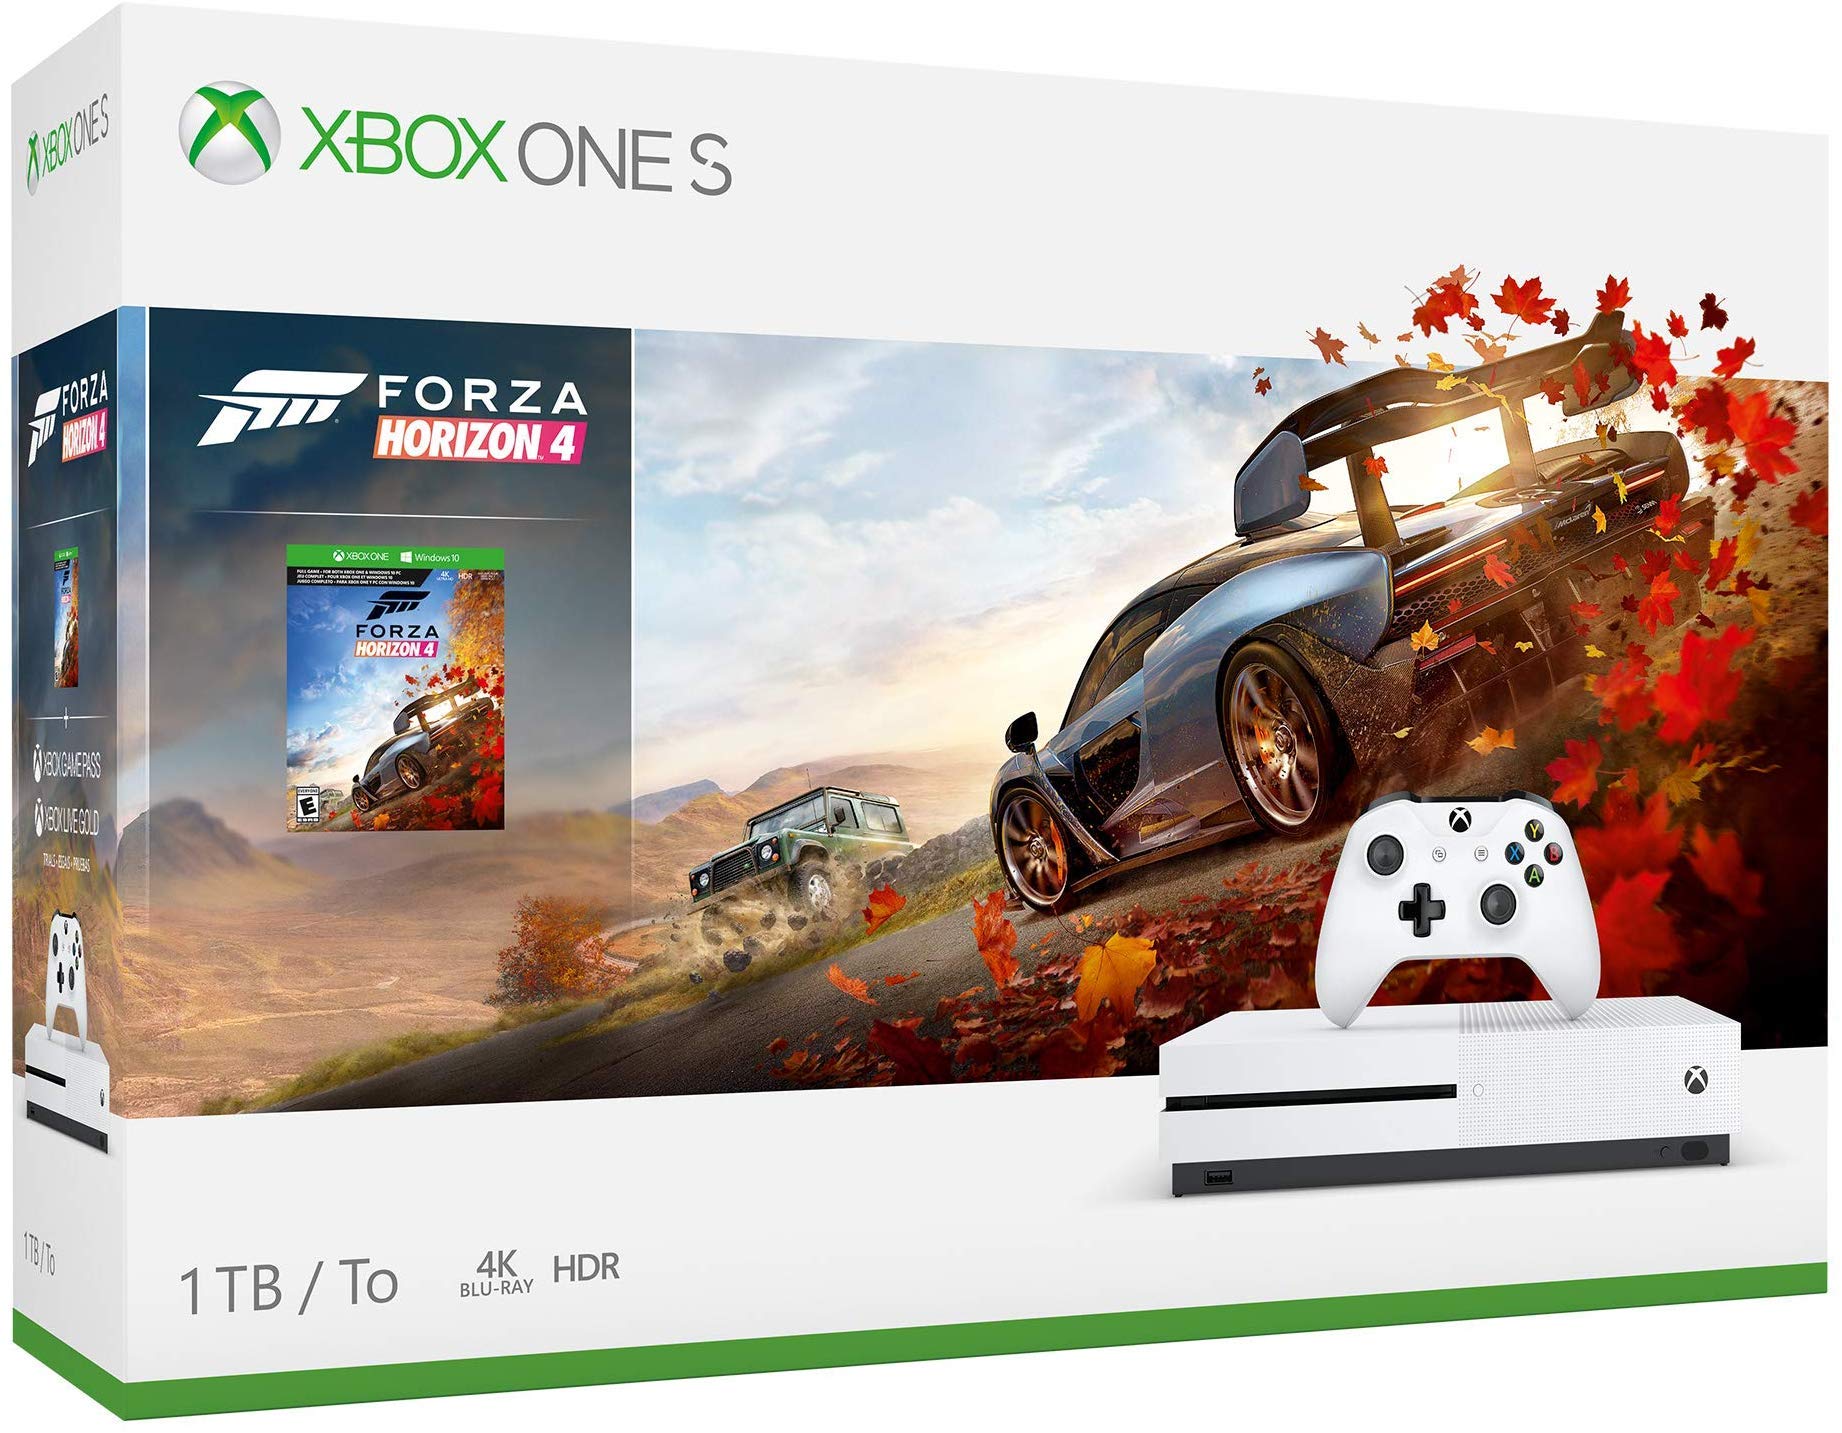 Xbox One S 1TB Forza Horizon 4 Console Bundle - Digital download of Forza Horizon 4 included - White Controller & Xbox One S included - 8GB RAM 1TB HD - Live Gold & Game Pass trials - 4K Blu-r